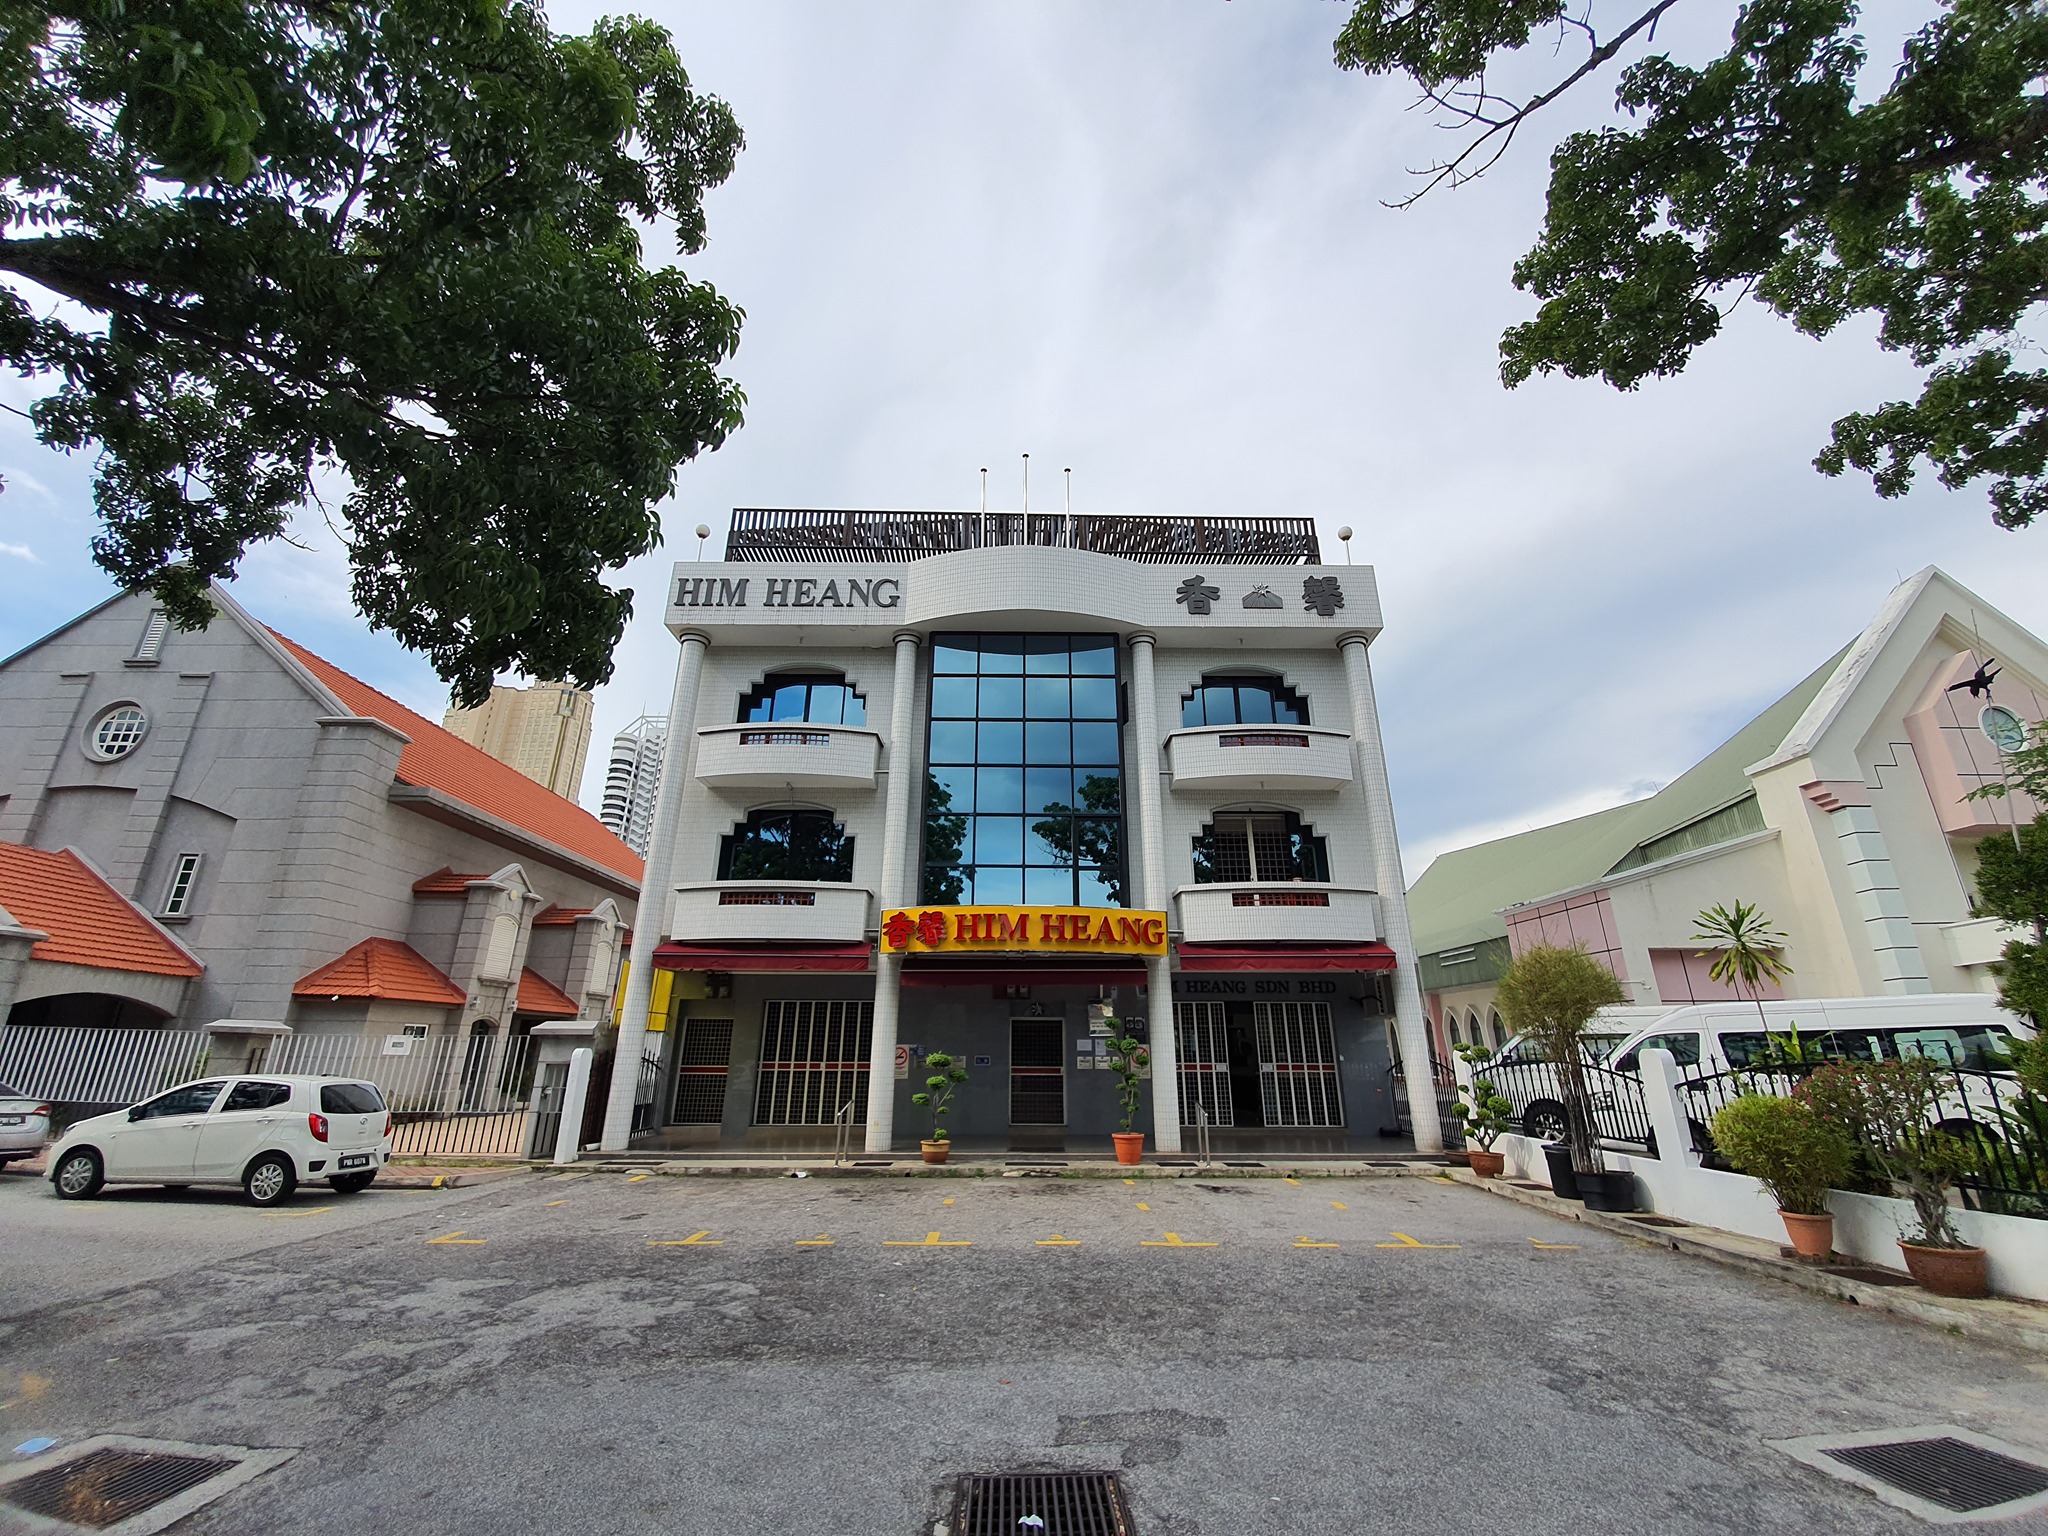 Things to do in Penang - Him Heang